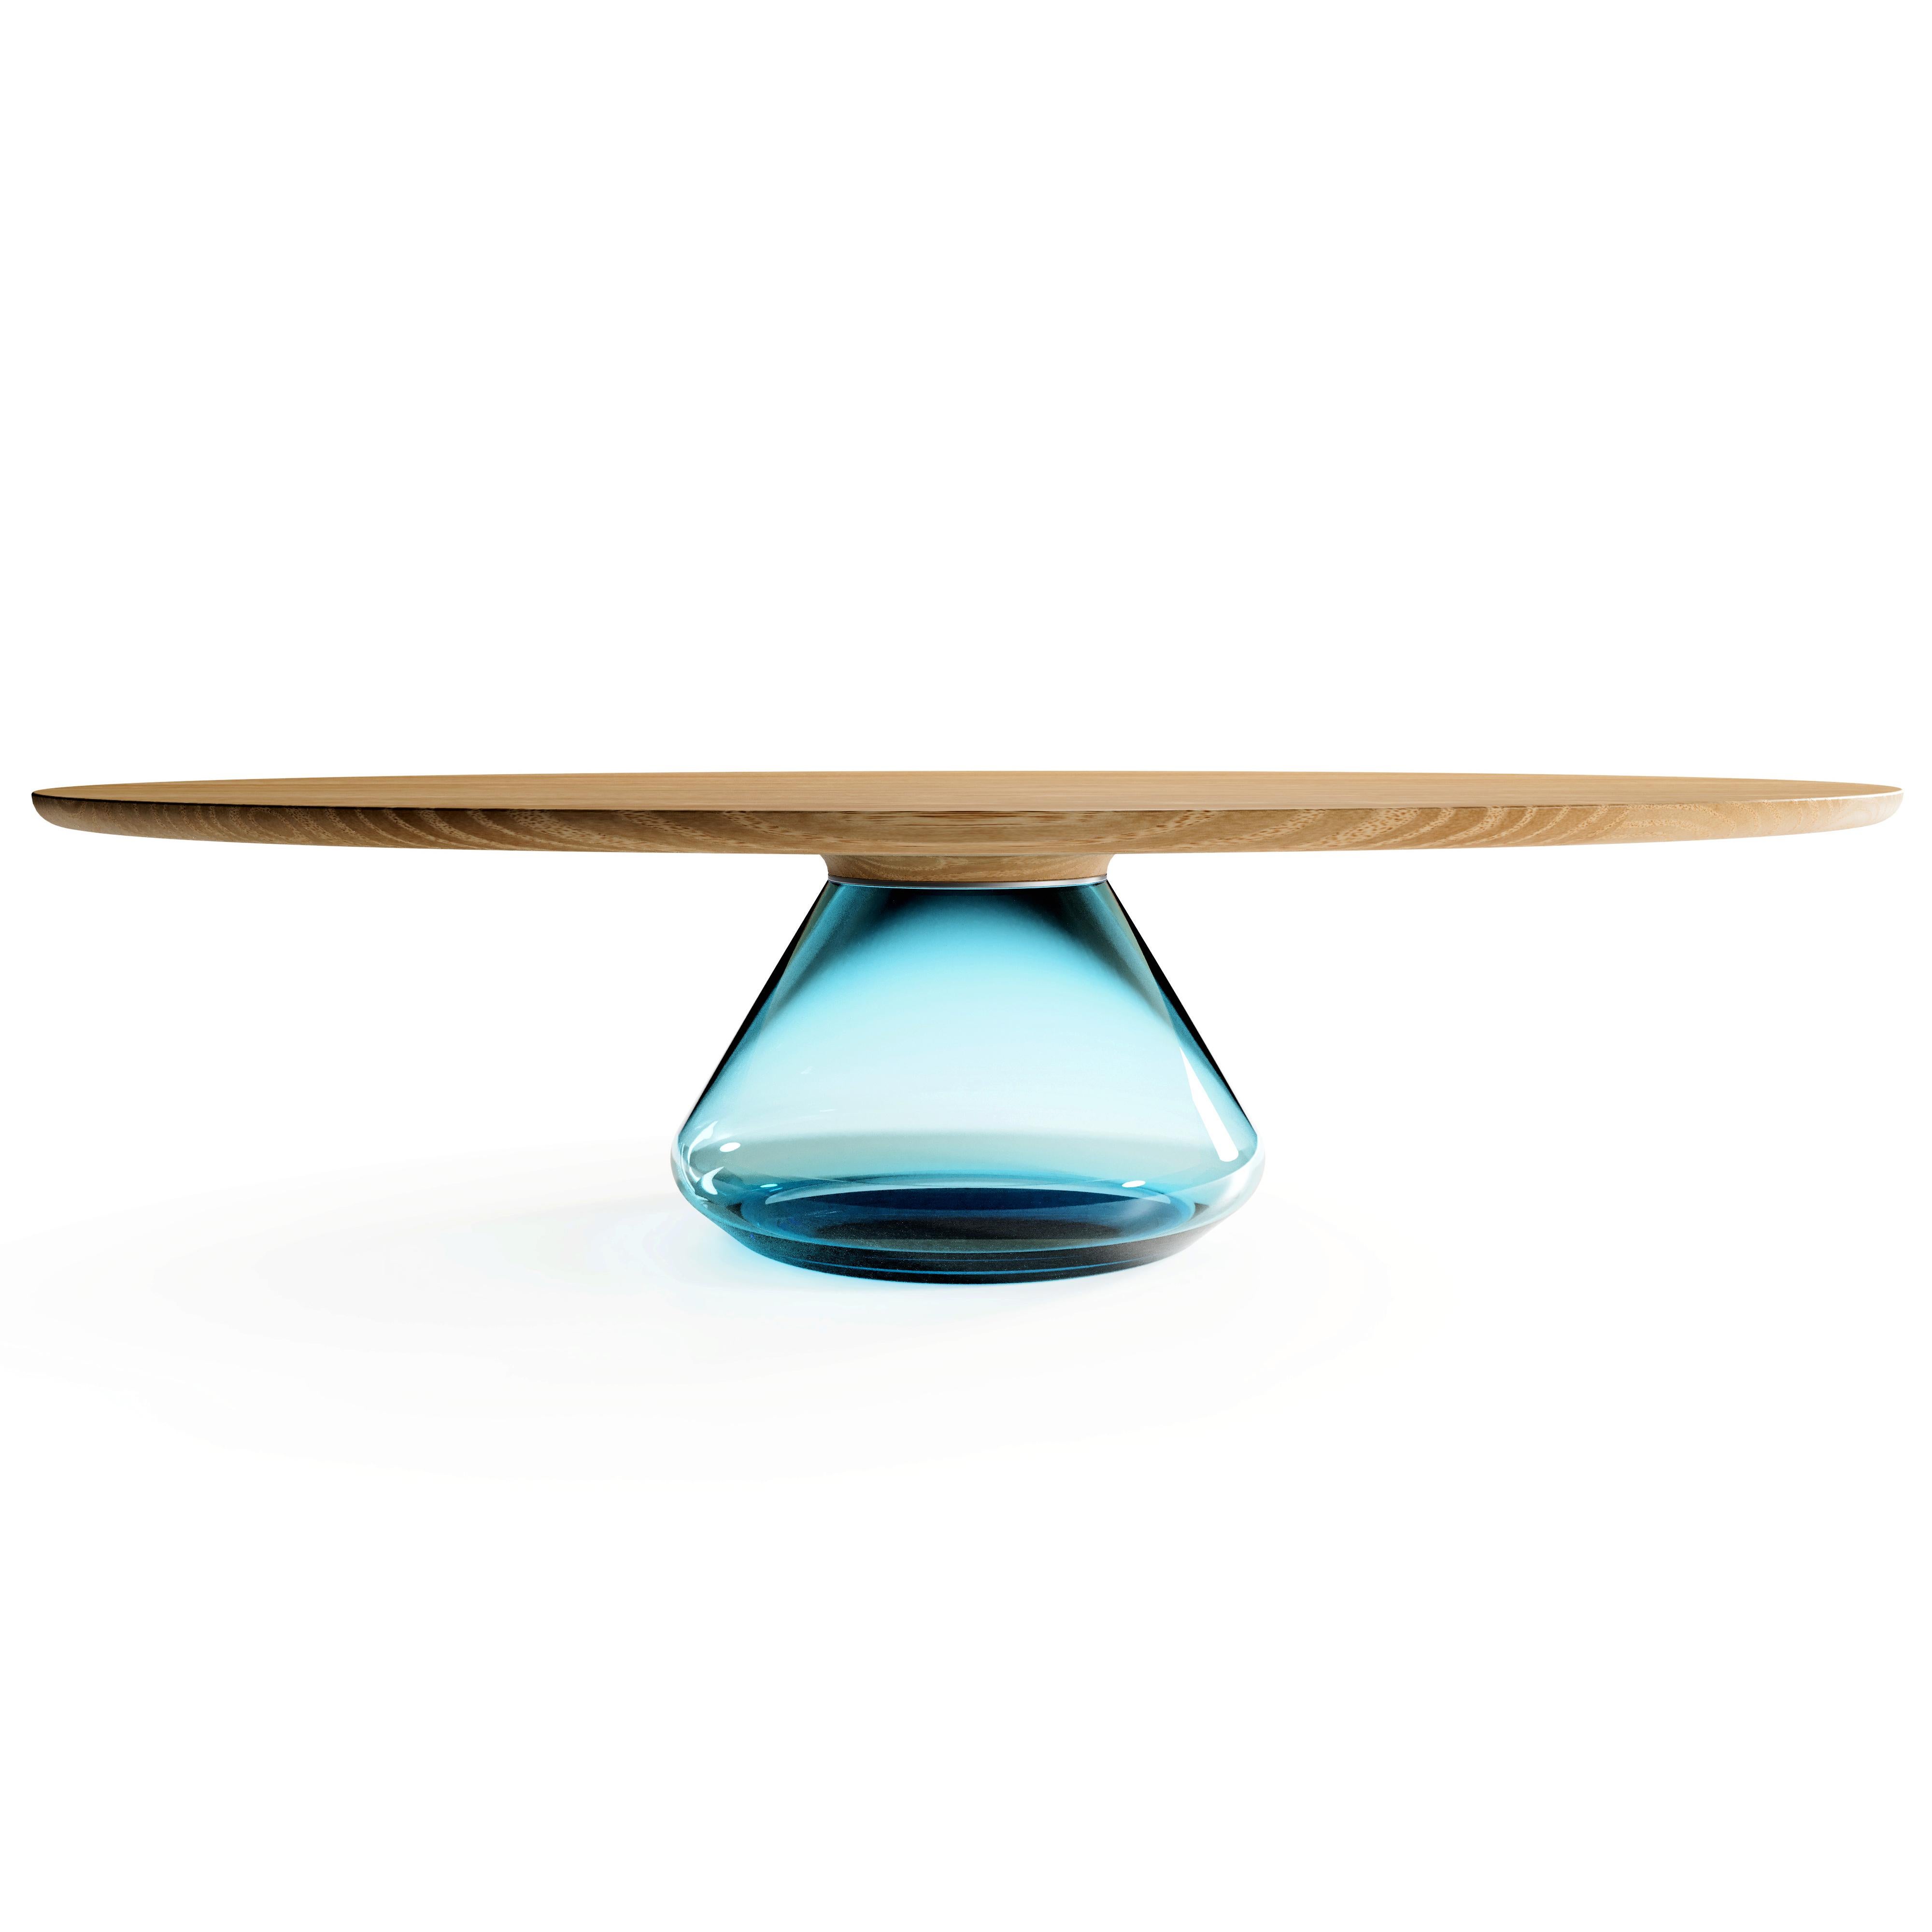 The Sky Eclipse I, limited edition coffee table by Grzegorz Majka
Limited edition of 8
Dimensions: 54 x 48 x 14 in
Materials: Glass, oak

The total eclipse of every interior? With this amazing table everything is possible as with its Minimalist